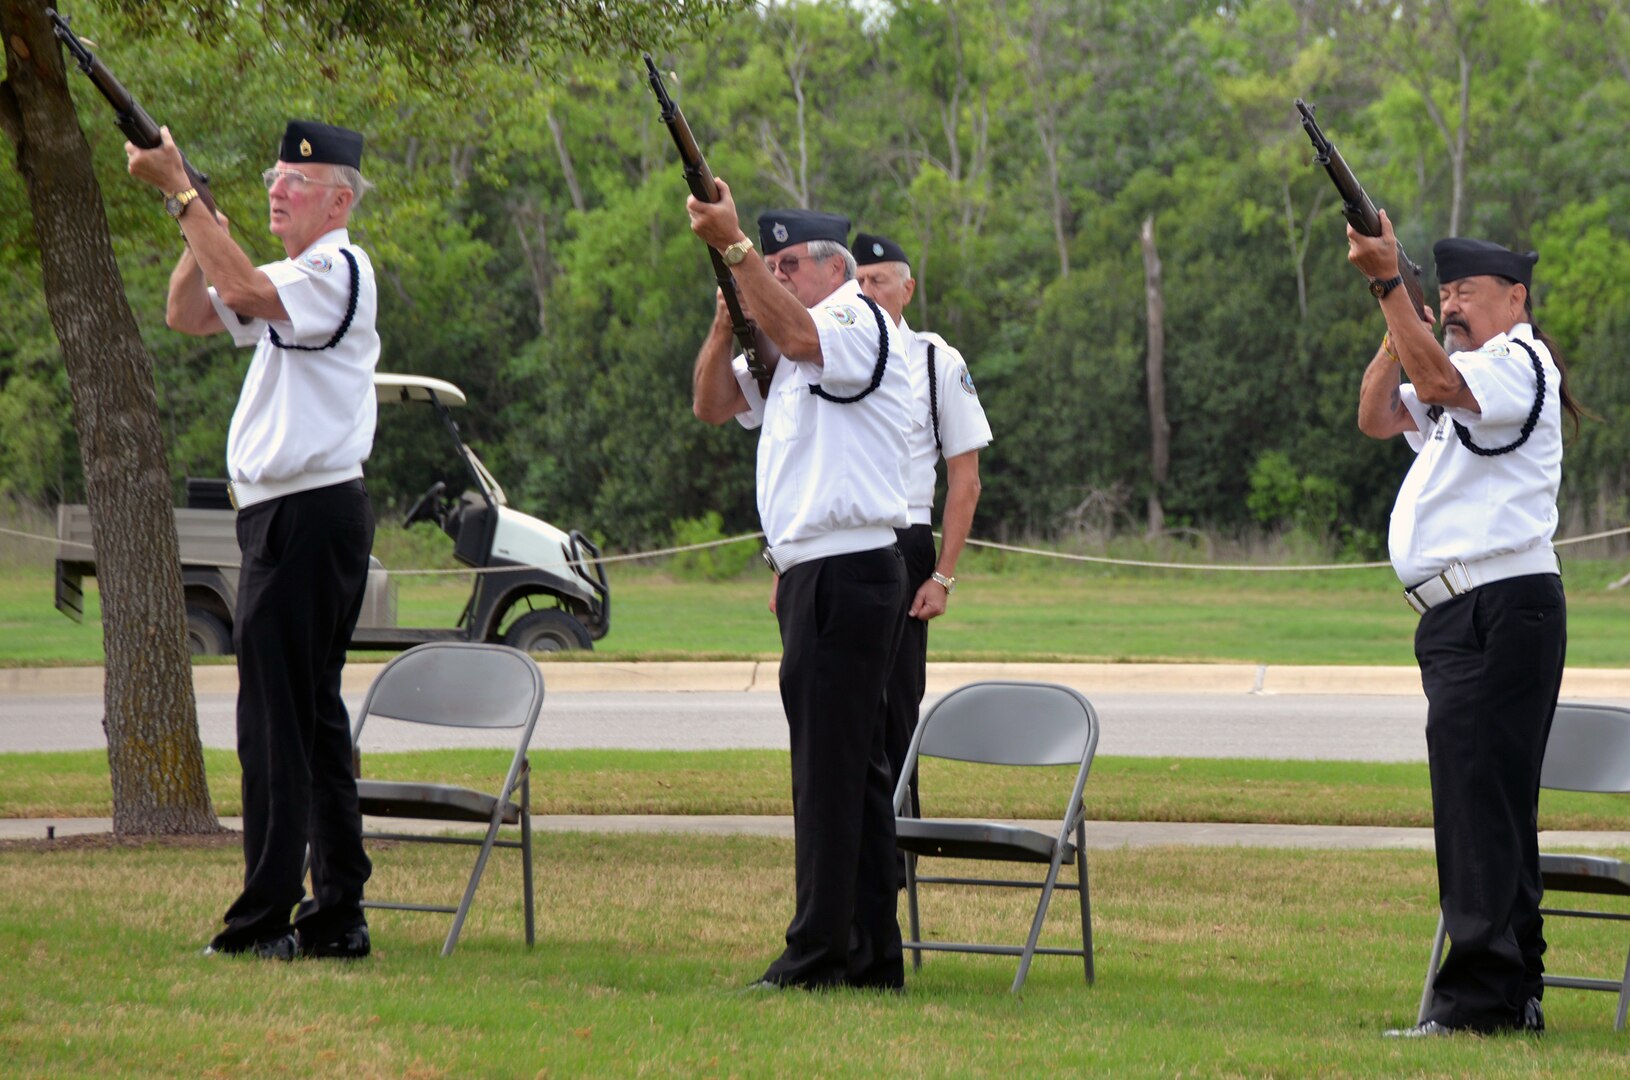 Members of the Memorial Services Detachment render honors by volleys of rifle fire near the conclusion of the ceremony for the 50th Anniversary of the Commemoration of the Vietnam War at the Fort Sam Houston National Cemetery March 27.